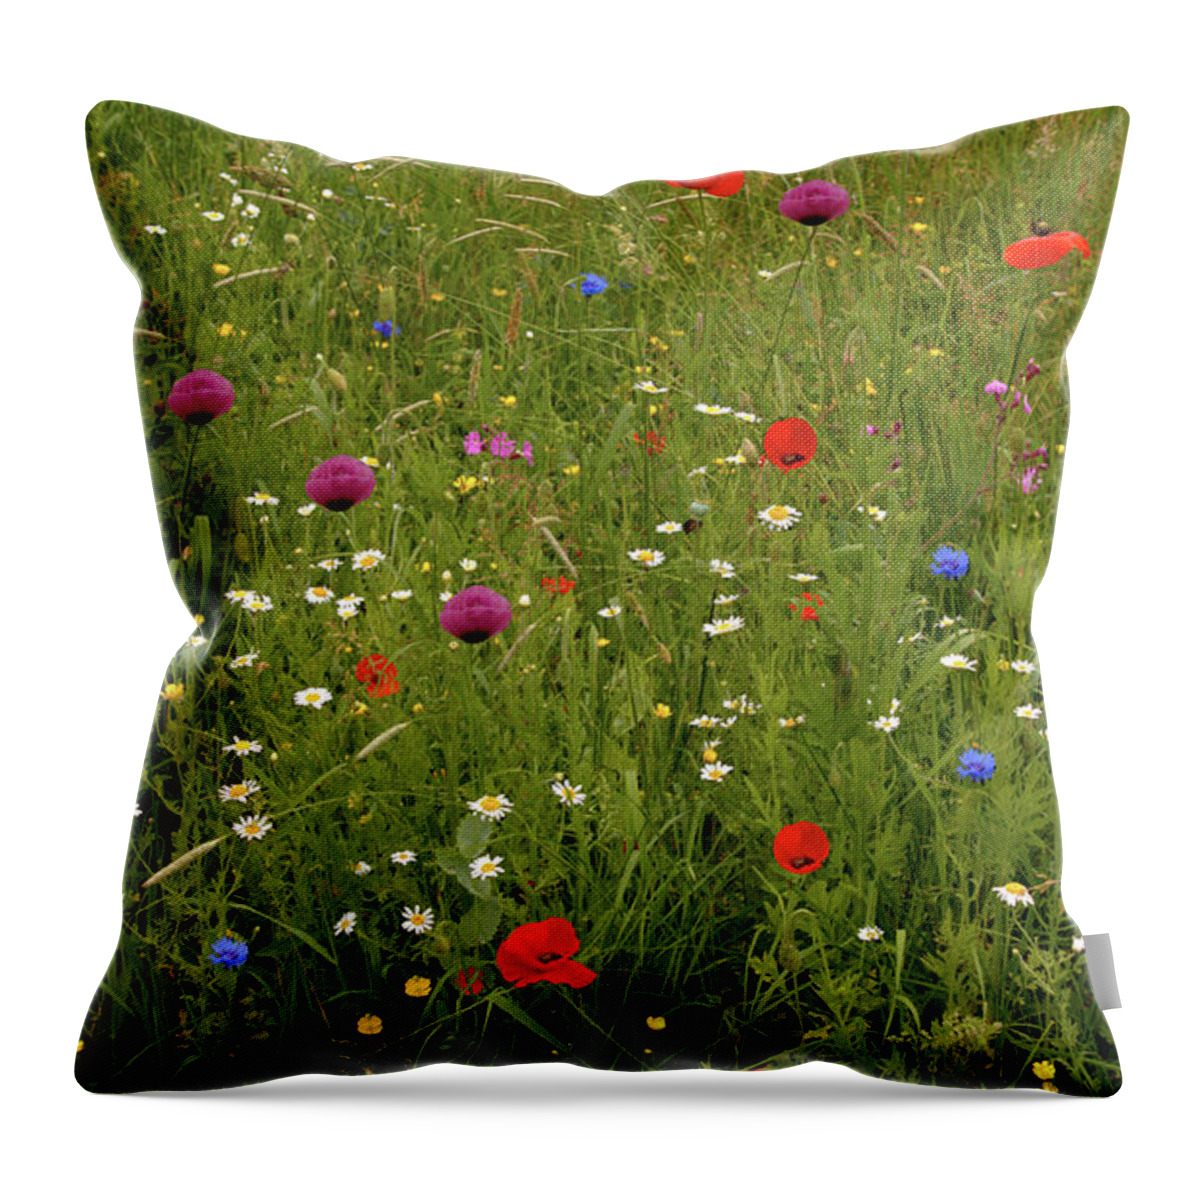 Summer Throw Pillow featuring the photograph Wild Summer Meadow by Stephen Melia